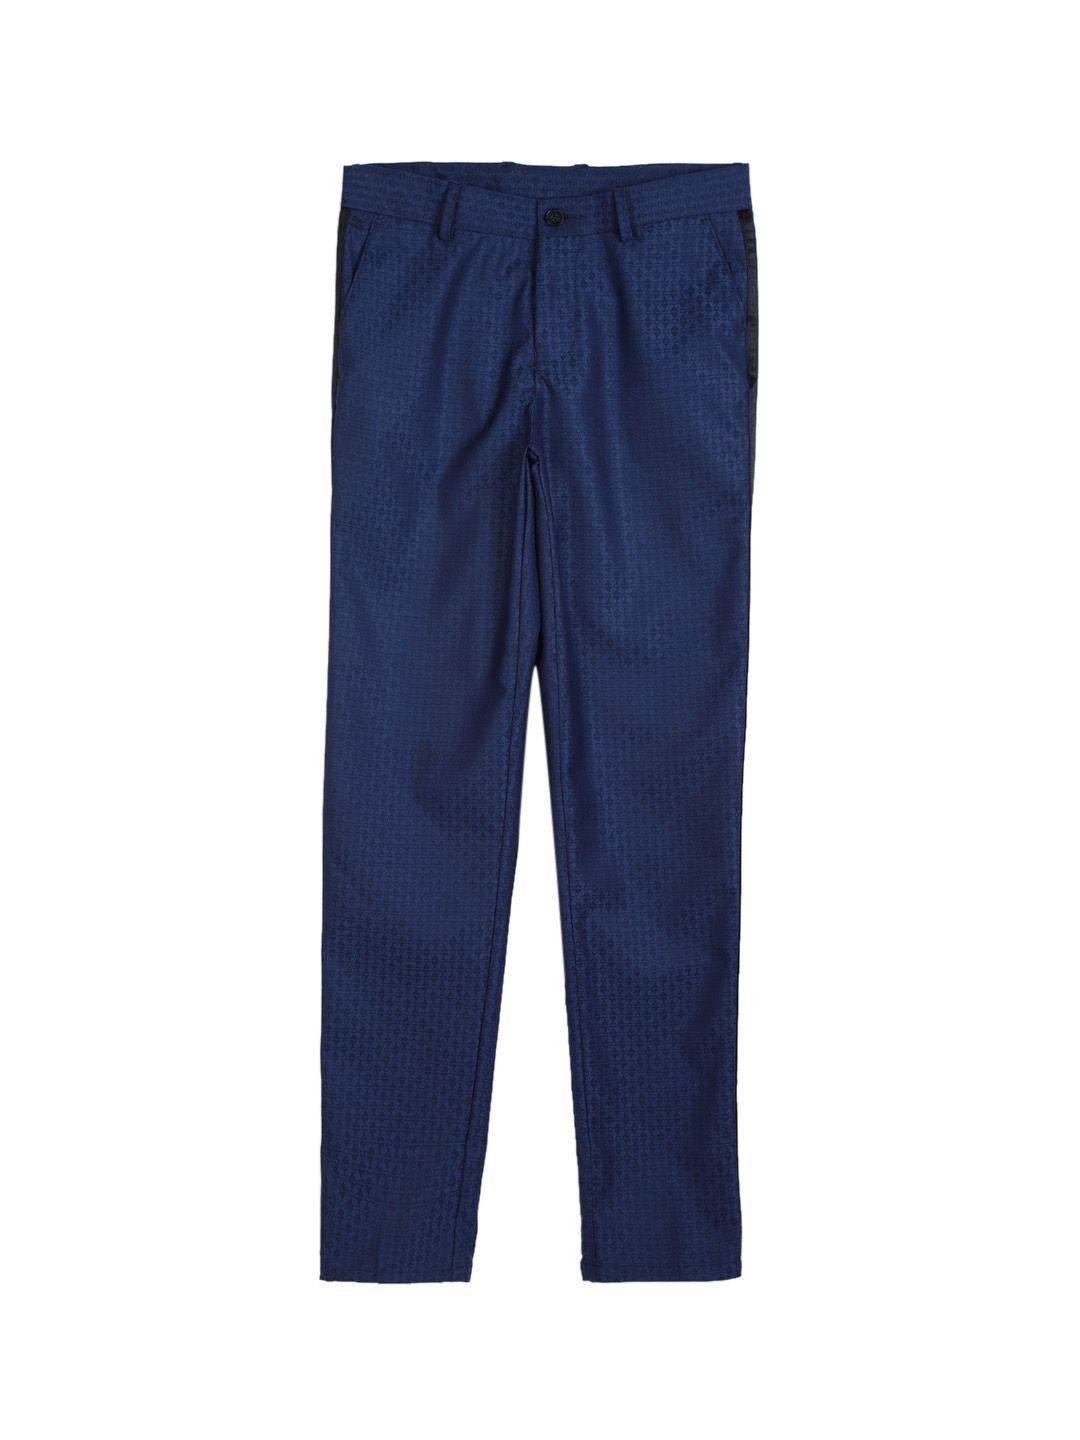 peter-england-boys-regular-fit-mid-rise-formal-trousers